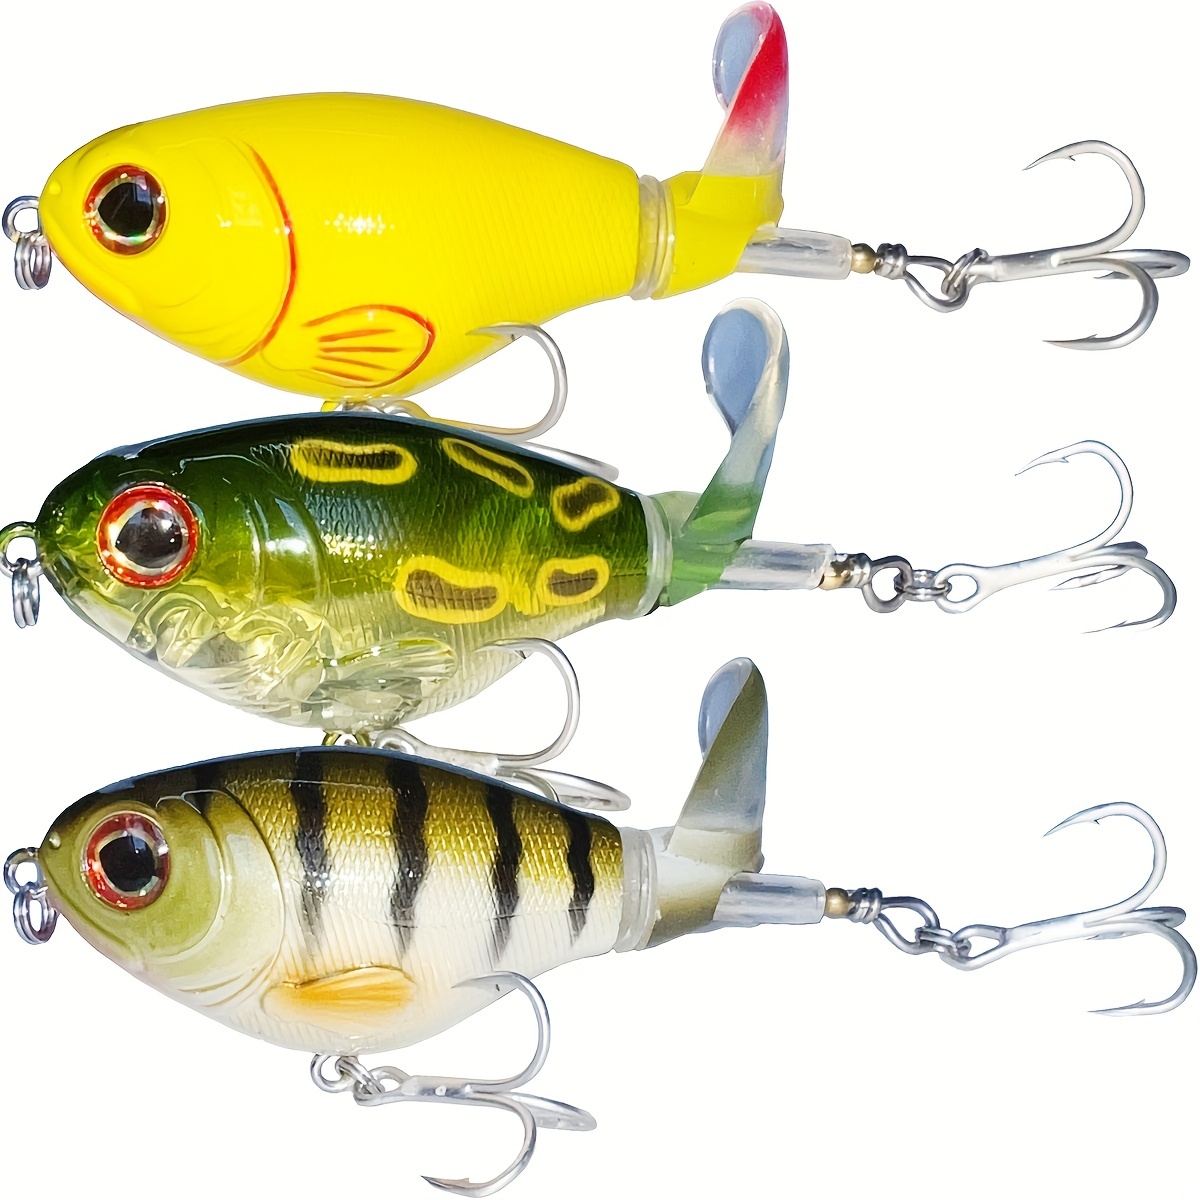 3pcs/set Topwater Fishing Lures With BKK Hooks, Plopper Fishing Lure For  Bass Catfish Pike Perch, Floating Bass Bait With Propeller Tail For  Freshwate